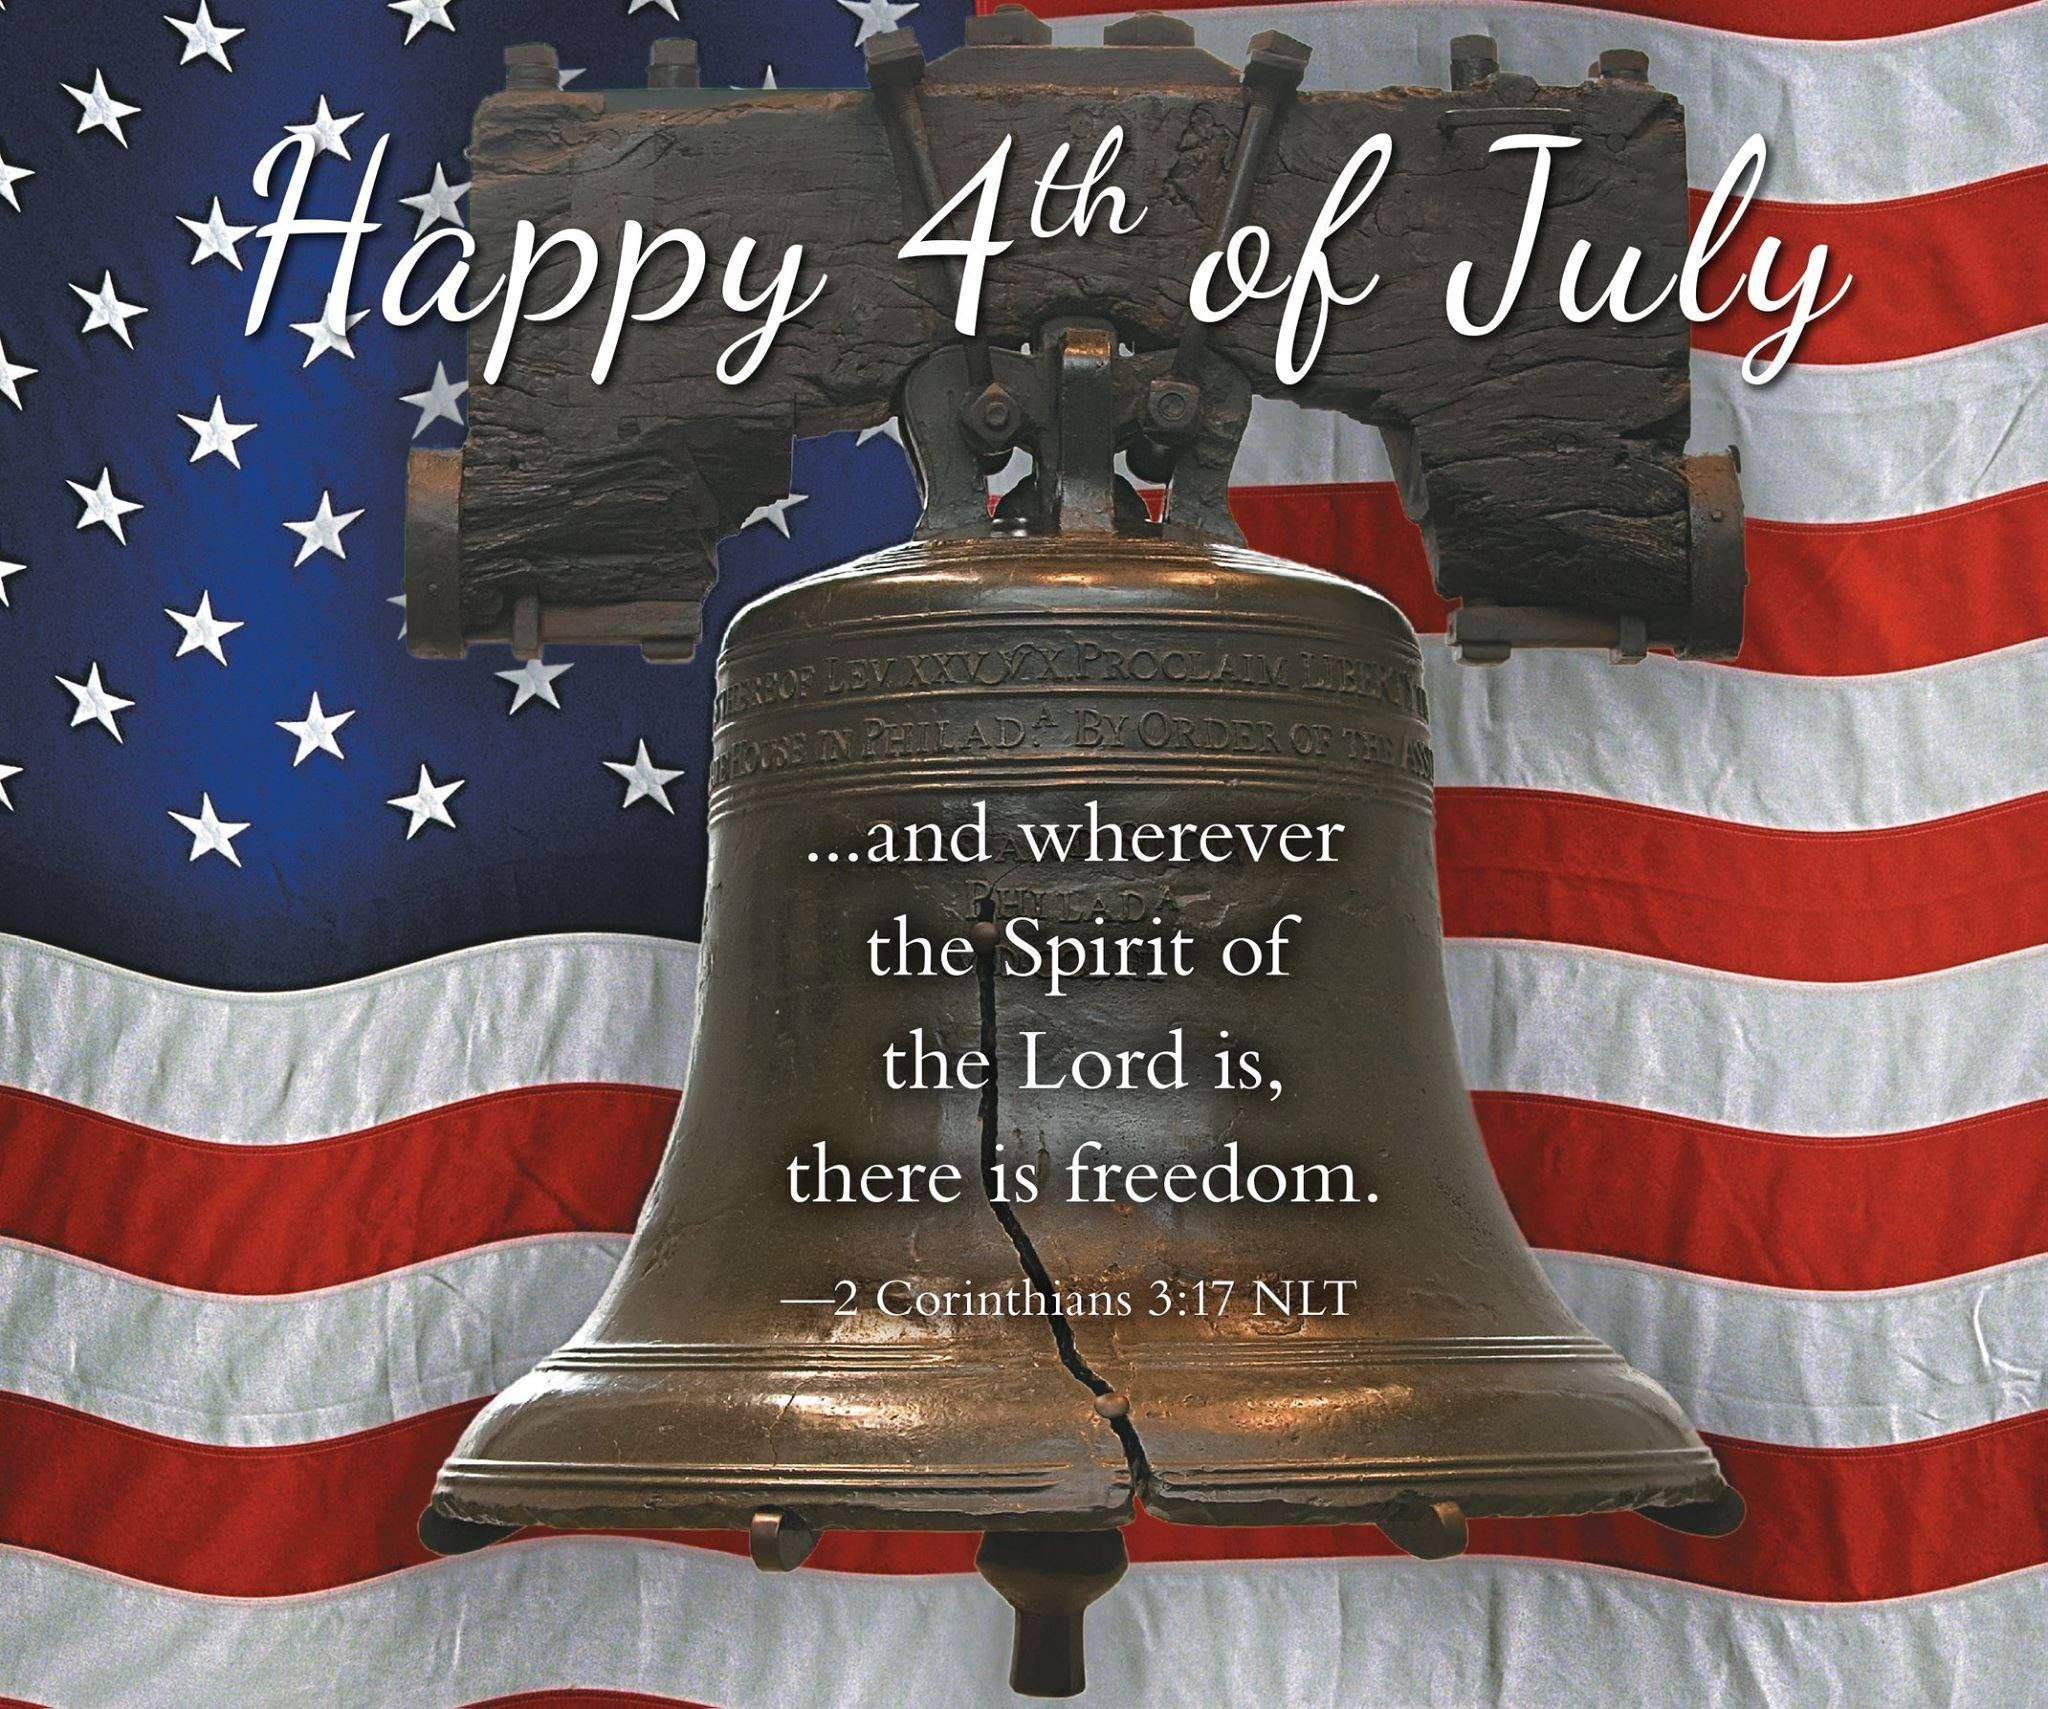 Religious 4th Of July Quotes
 Religious Happy 4th Jul Quote s and